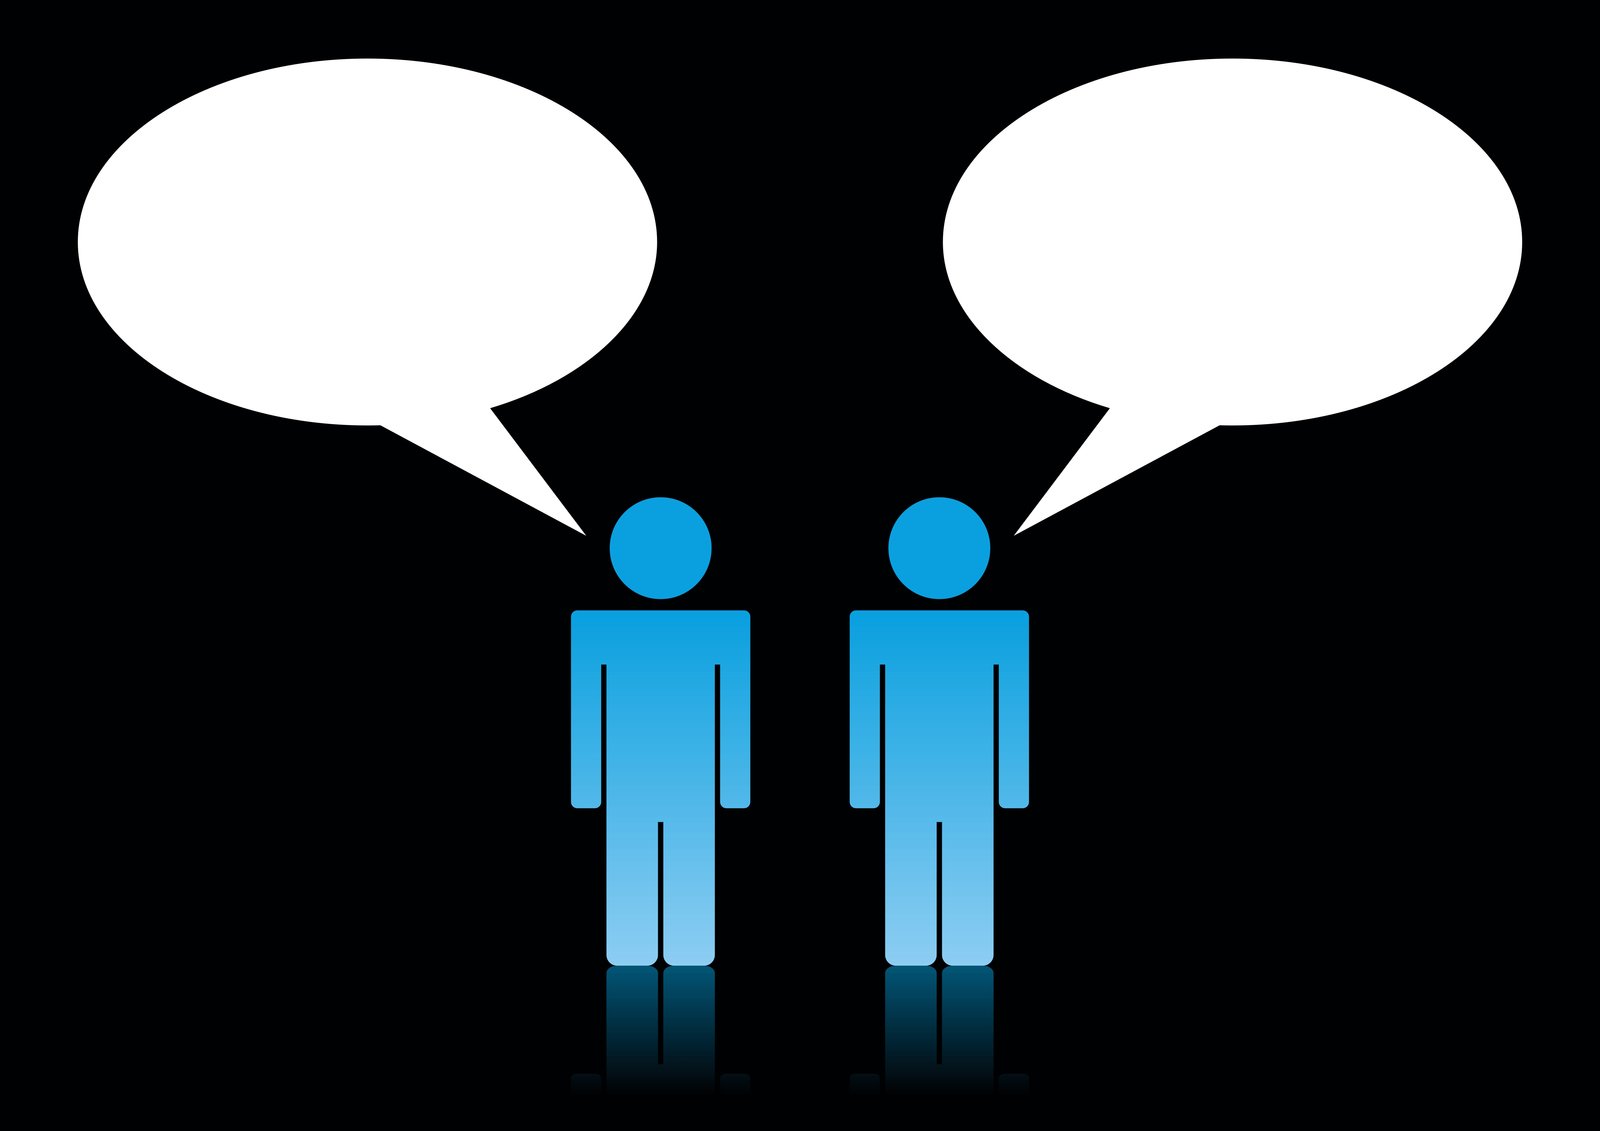 two blue men standing talking to each other with speech bubbles above them